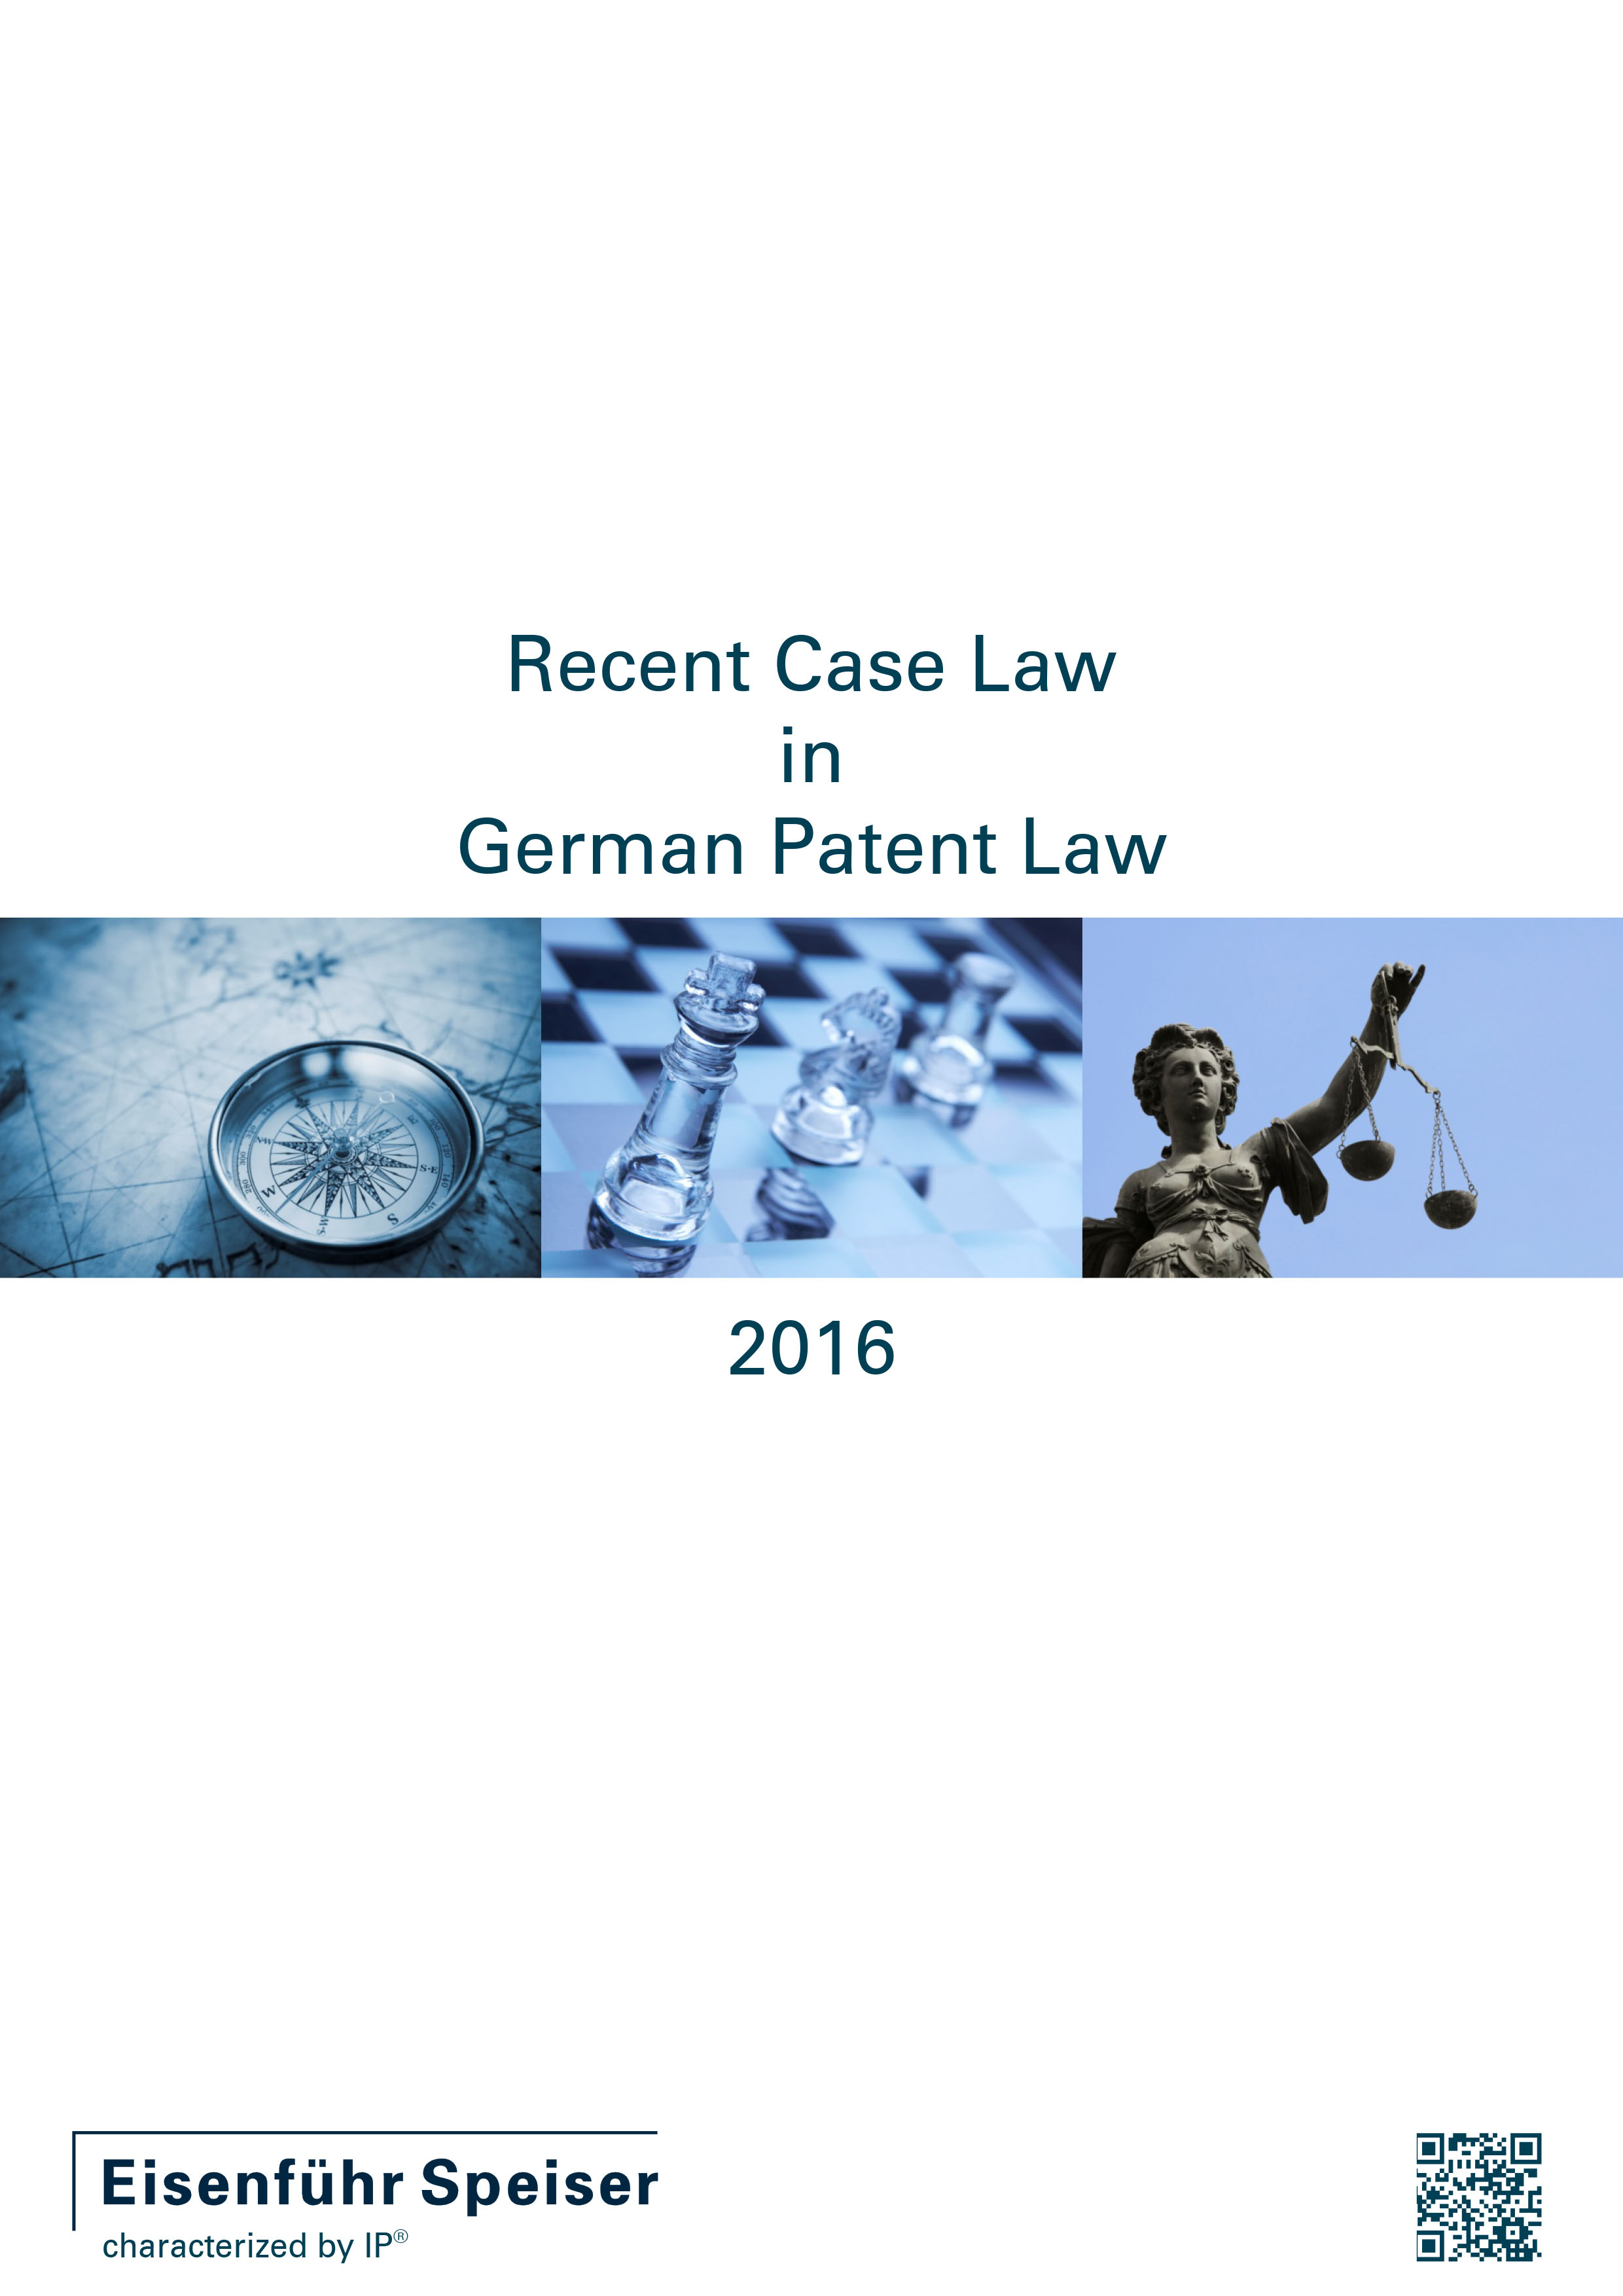 Recent Case Law in German Patent Law 2016